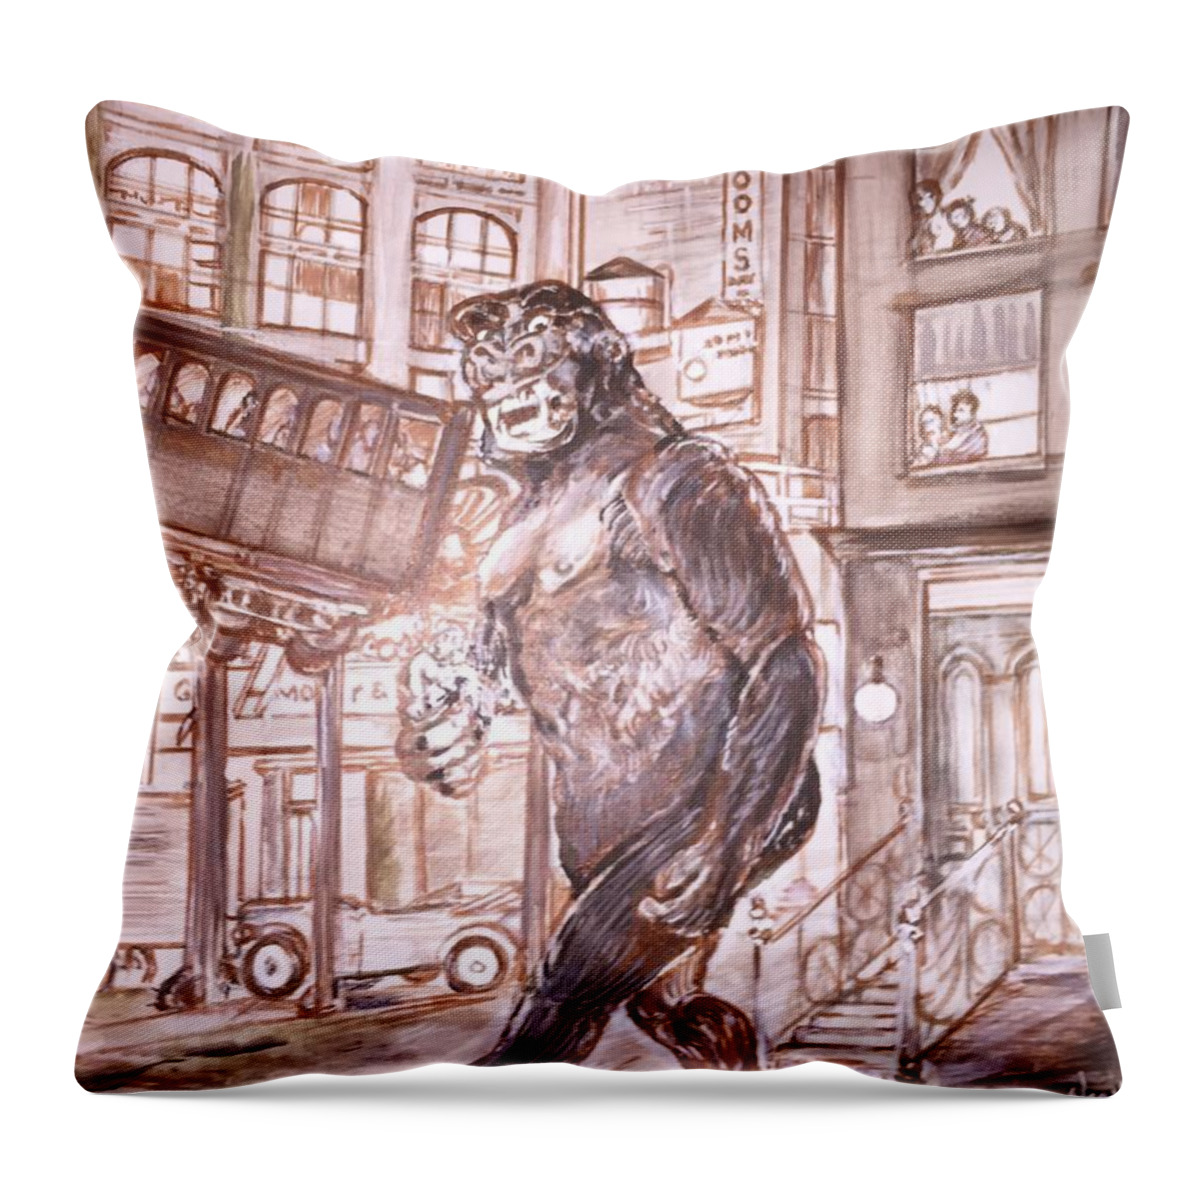 King Kong 1933 Bruce Cabot Robert Armstrong Fay Wray Creature Features Rko Radio Pictures Silver Screen Throw Pillow featuring the painting King Kong - Kong At The Trestle by Jonathan Morrill